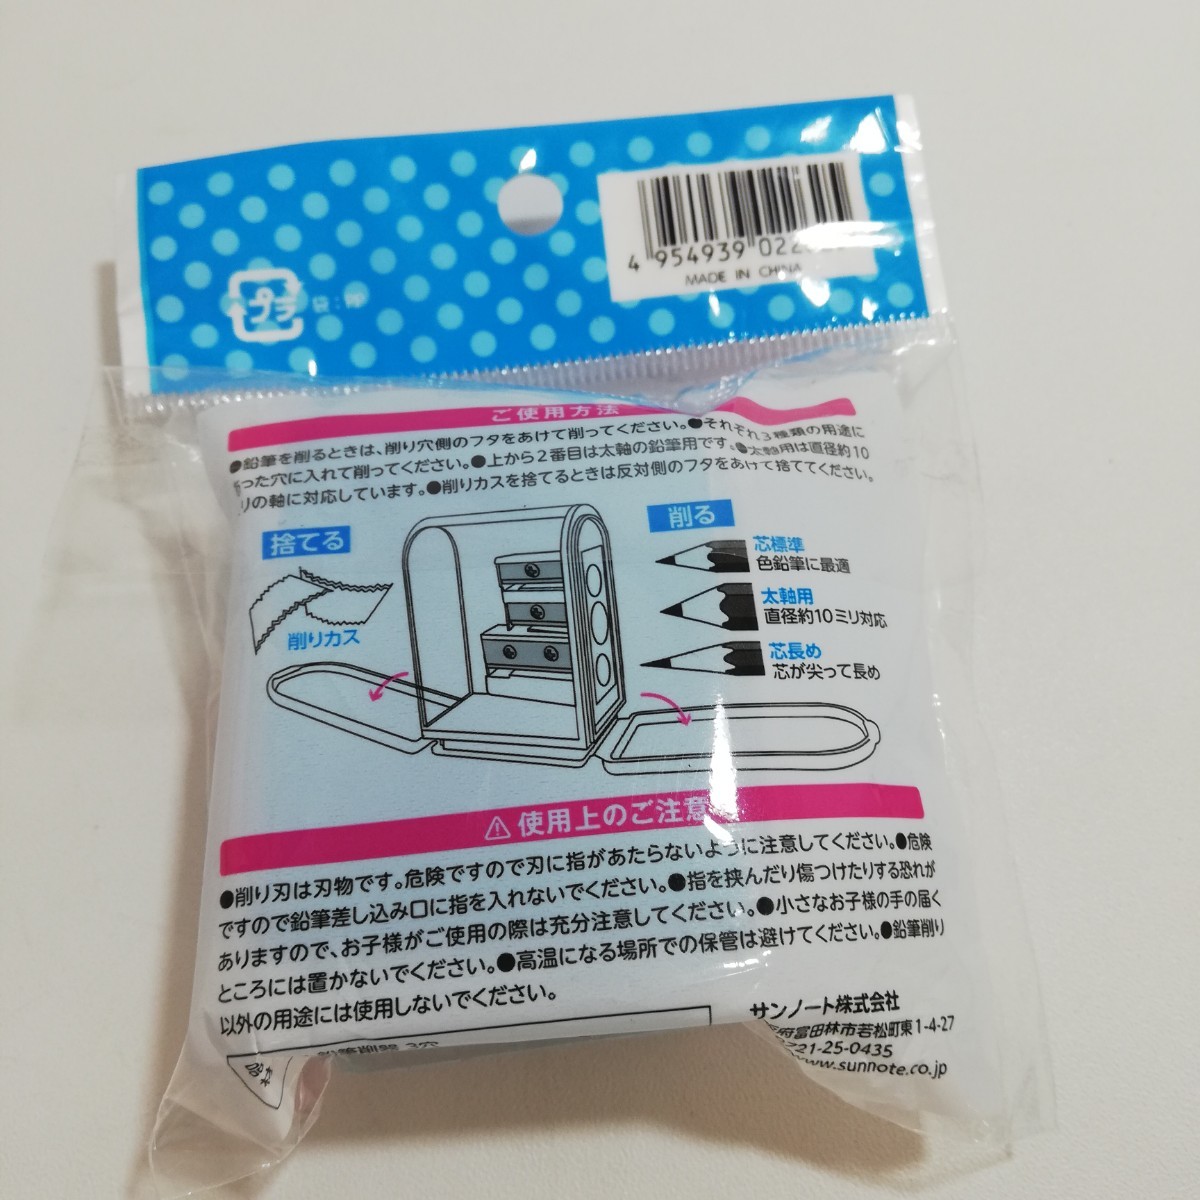  sun Note corporation 3way Pencil Sharpener 3H according possible to use pencil sharpener core standard futoshi axis for core length . unused goods [.... shaving stationery ]